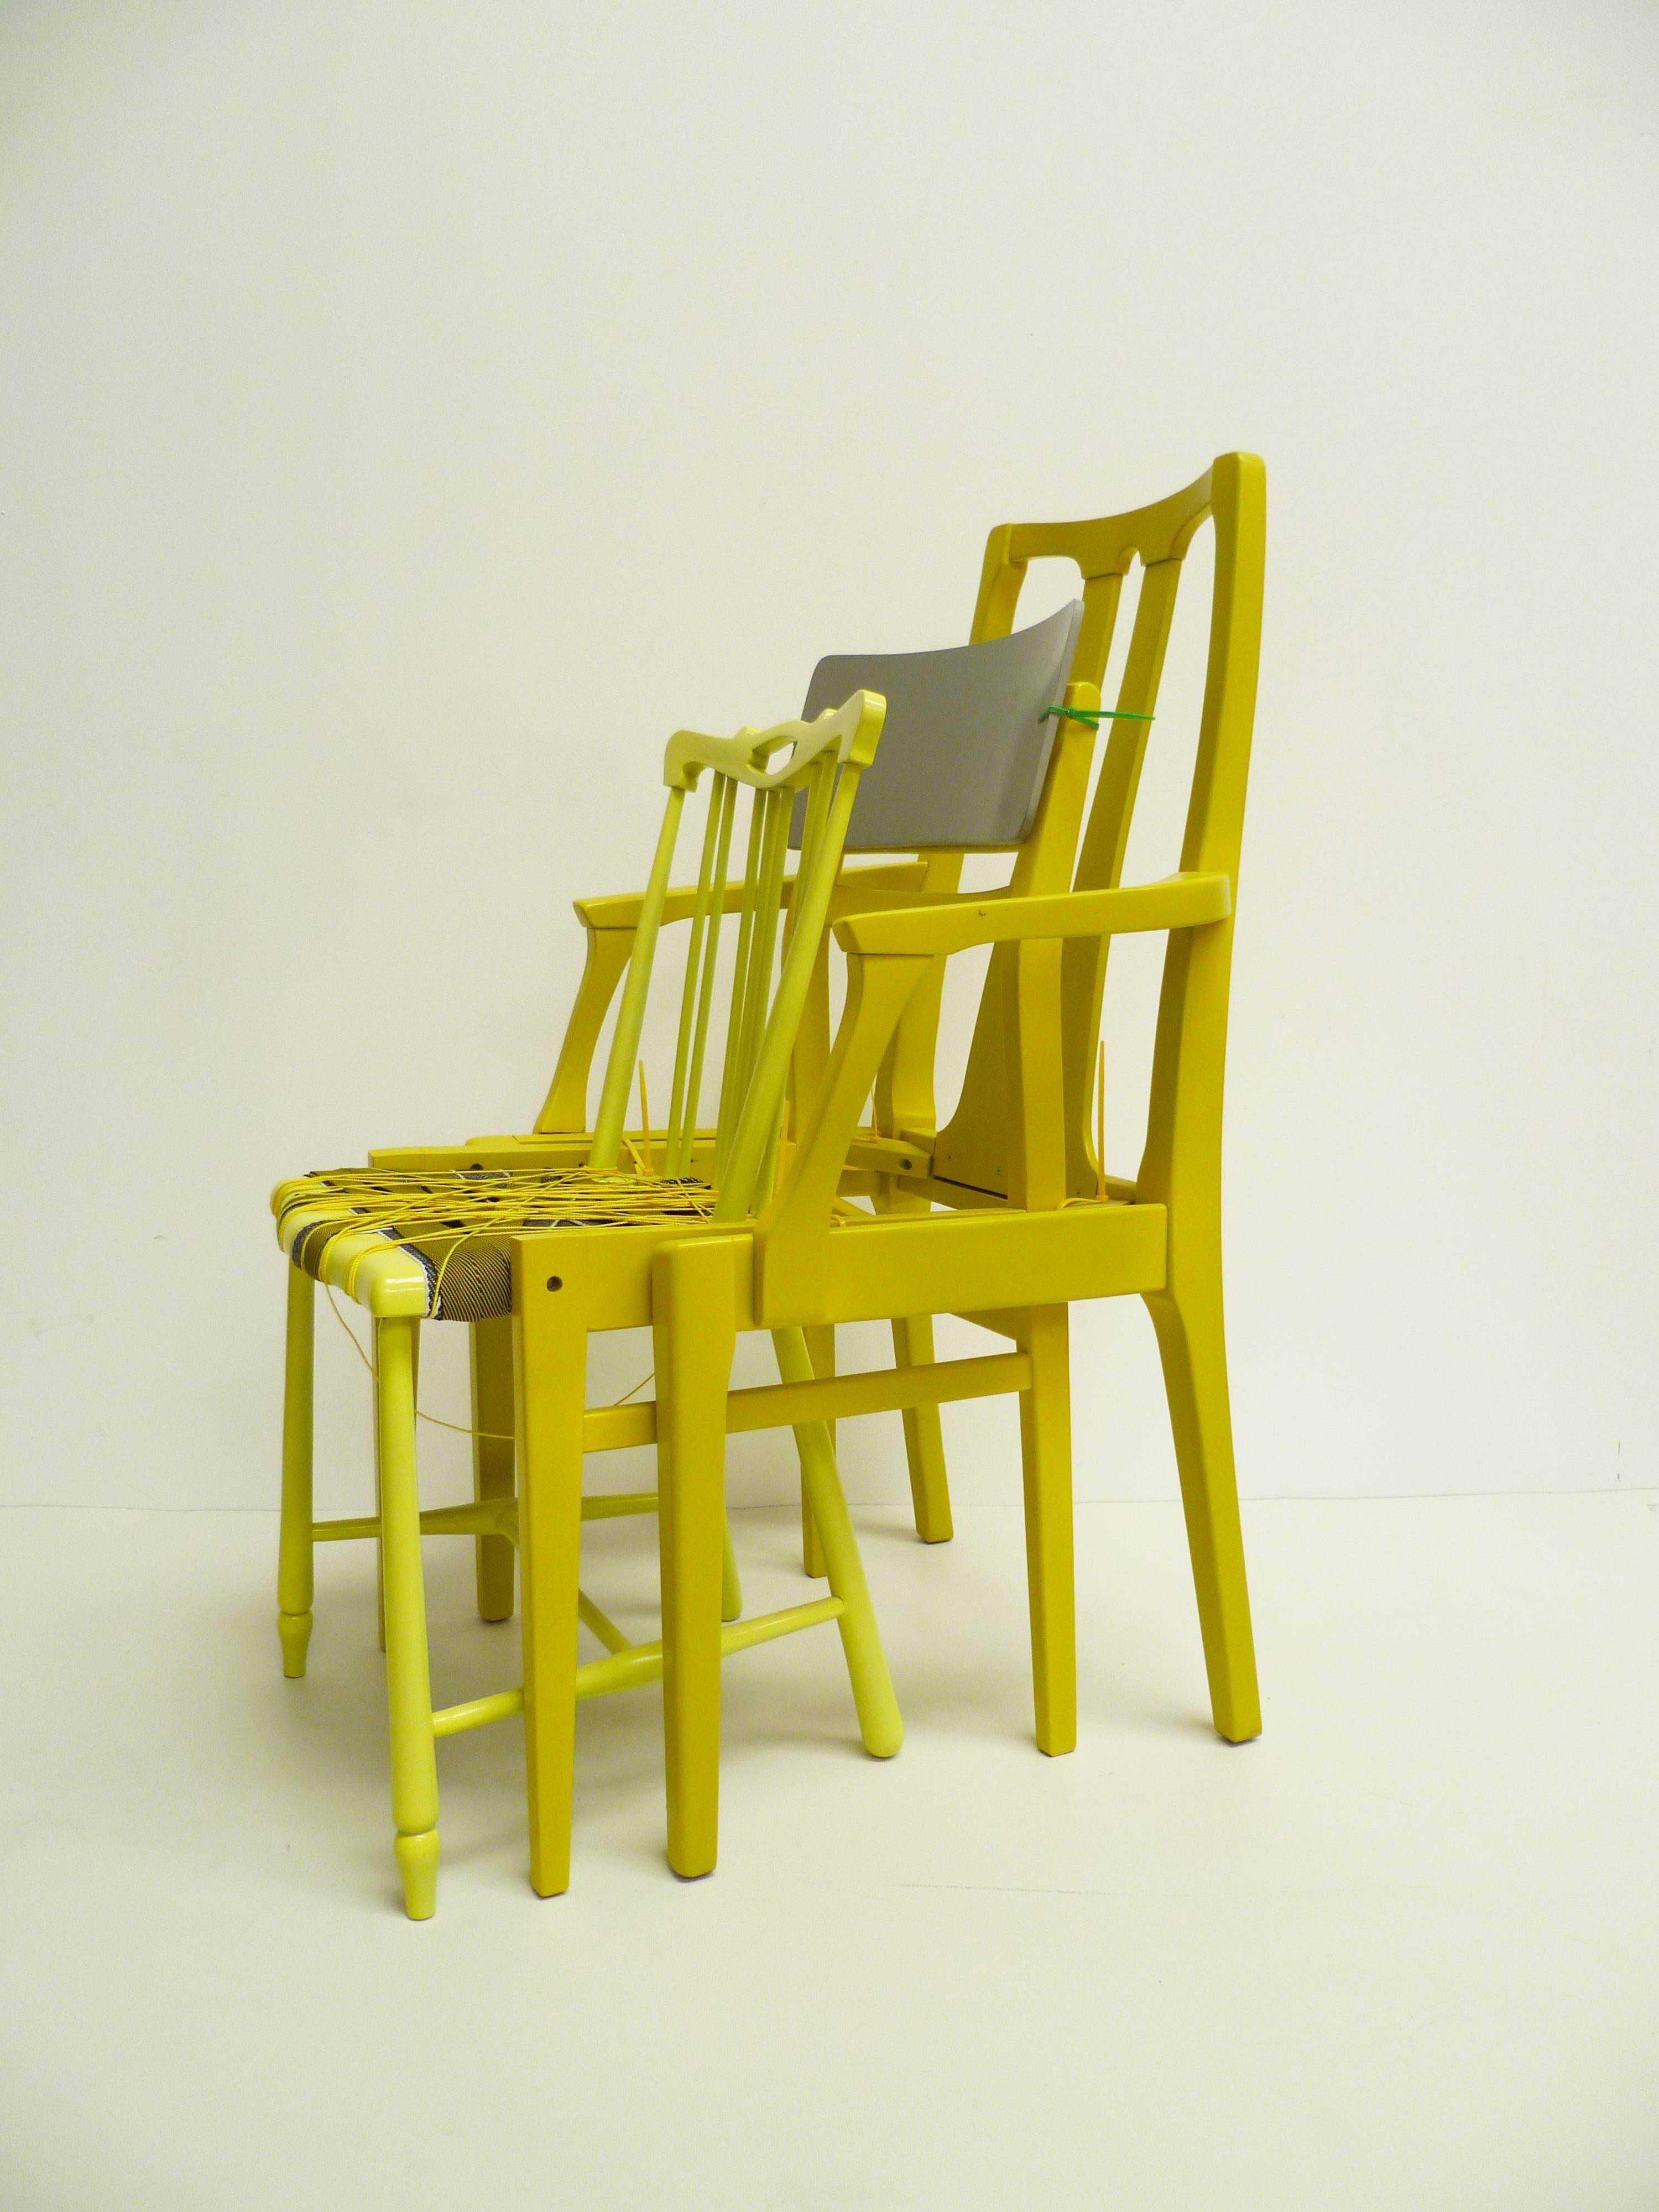 Karen Ryan’s ‘Custom Chair’ series began in 2005, drawing from the history of discarded objects, this chair recycles mass-produced chair components, sprayed bright shades of yellow, secured together with plastic ties, and the seat is finished with